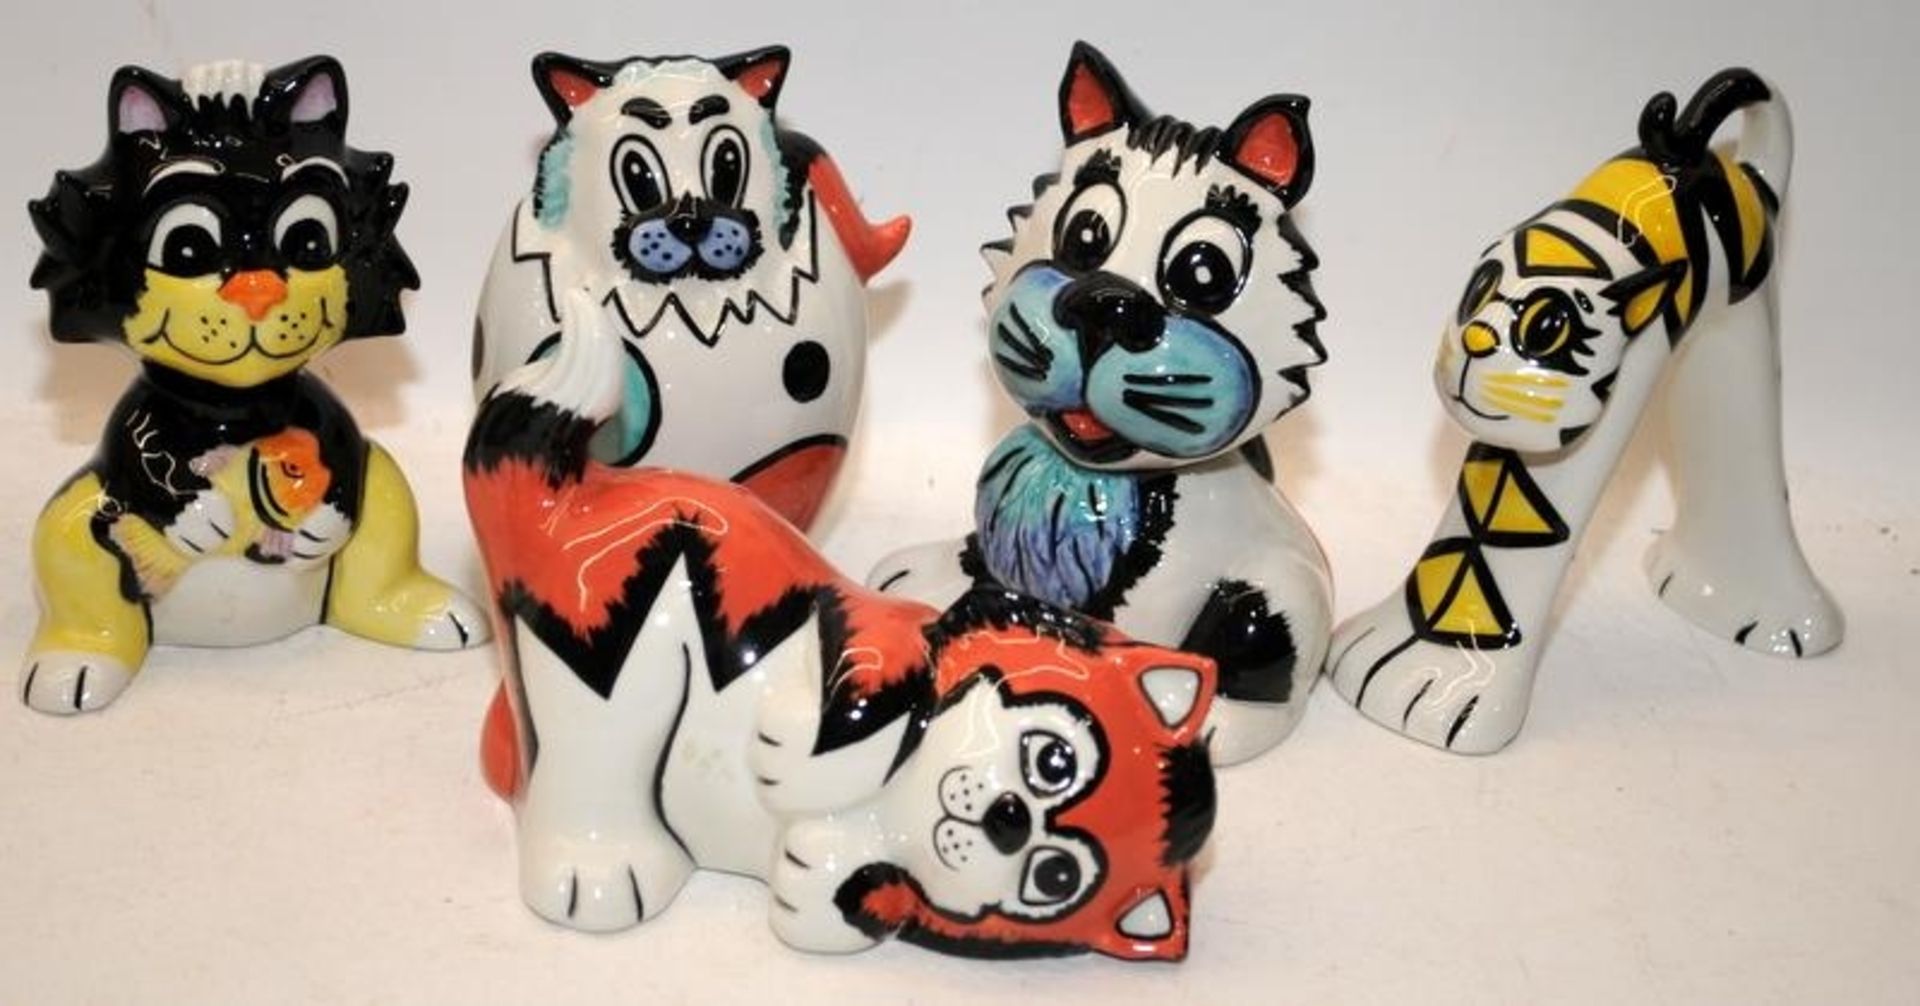 5 x Lorna Bailey cat figures including Tilly, Kipper, Eggbert and Charlie. All signed